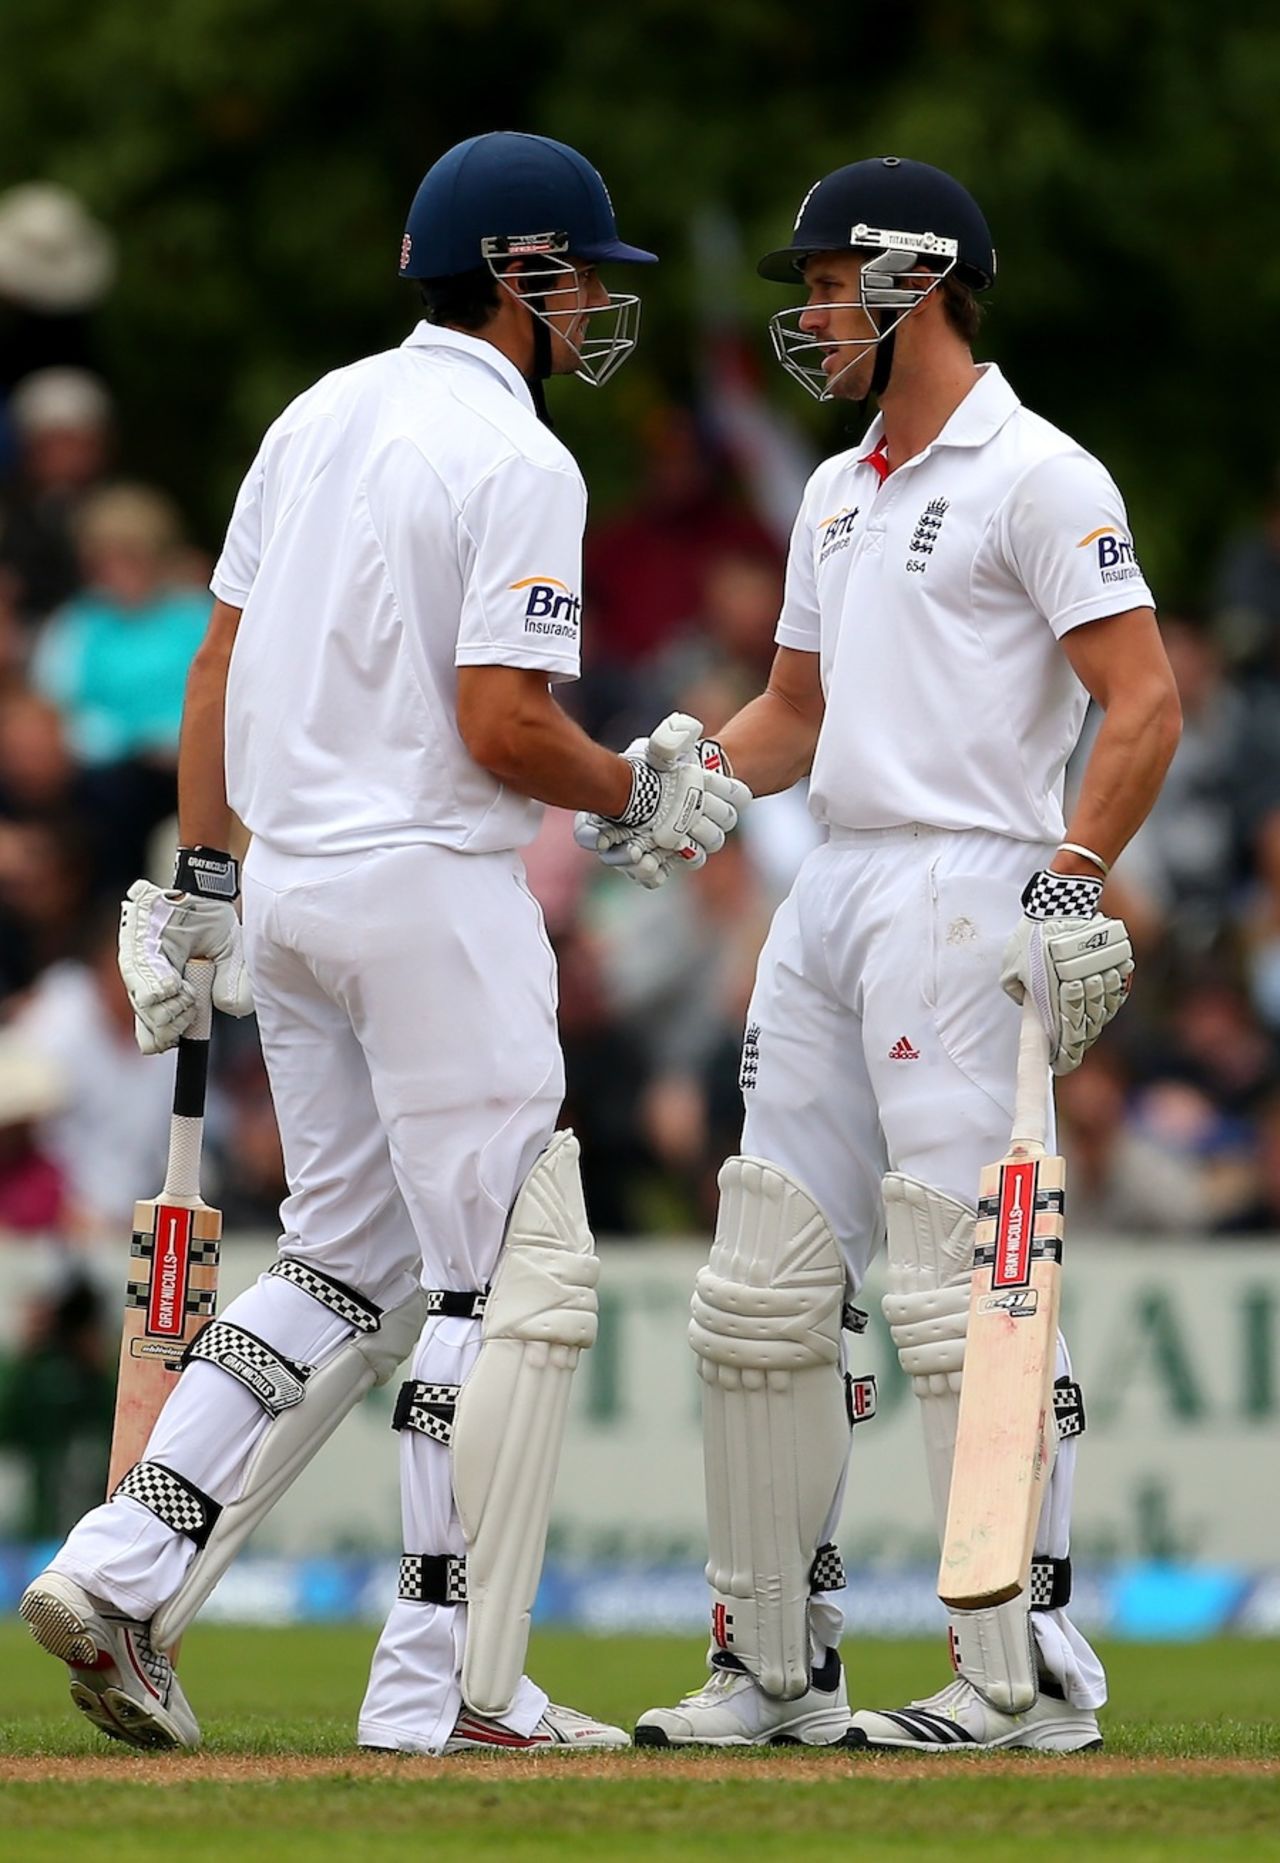 Alastair Cook and Nick Compton brought up their century opening stand after lunch, New Zealand v England, 1st Test, Dunedin, 4th day, March 9, 2013